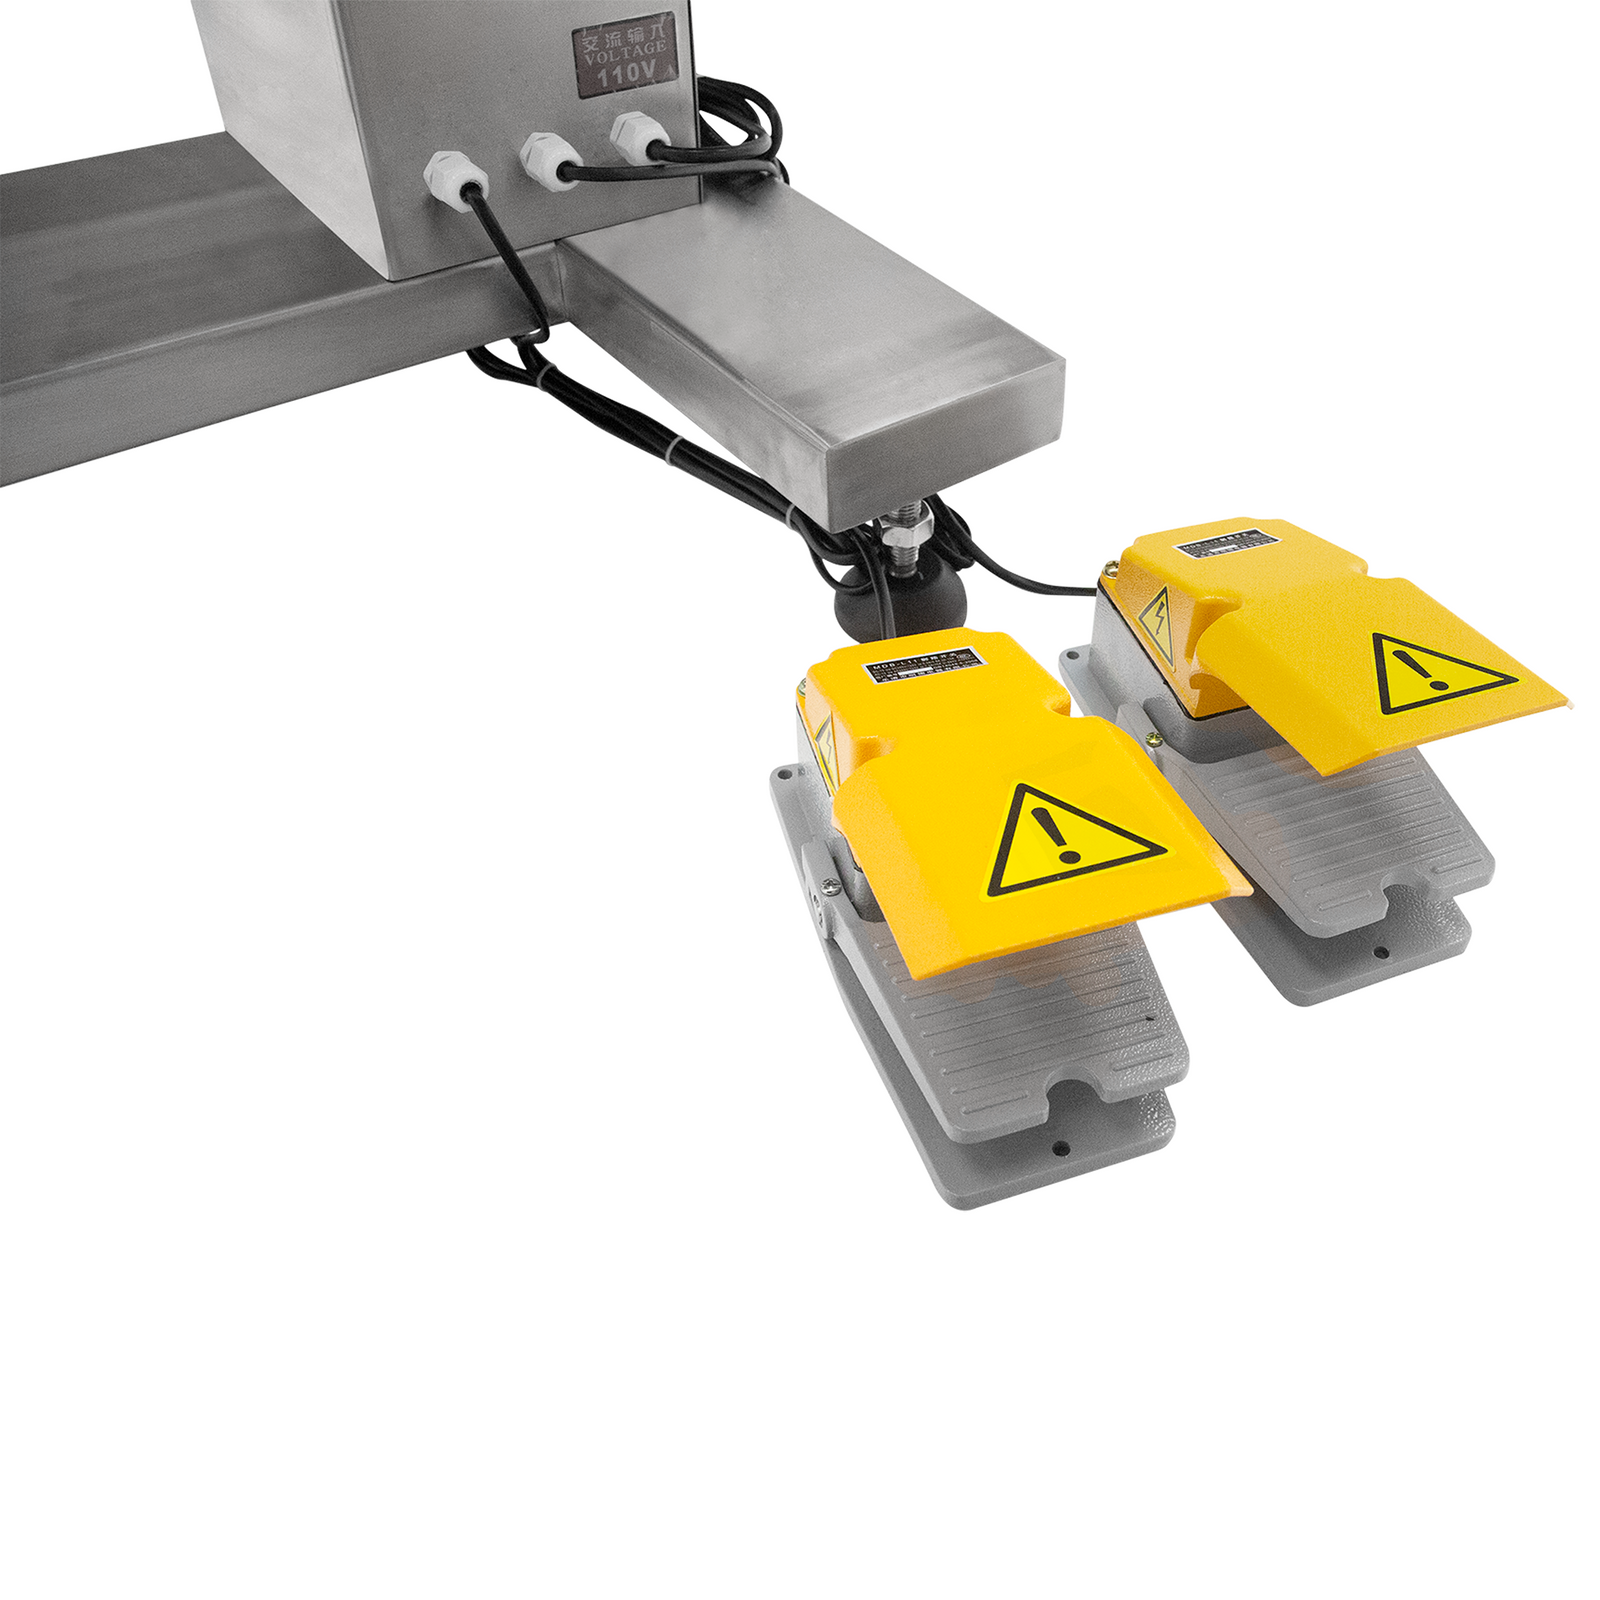 Two foot pedals with yellow safety foot coverings belonging to the automatic dual head high viscosity filling system by JORES TECHNOLOGIES®